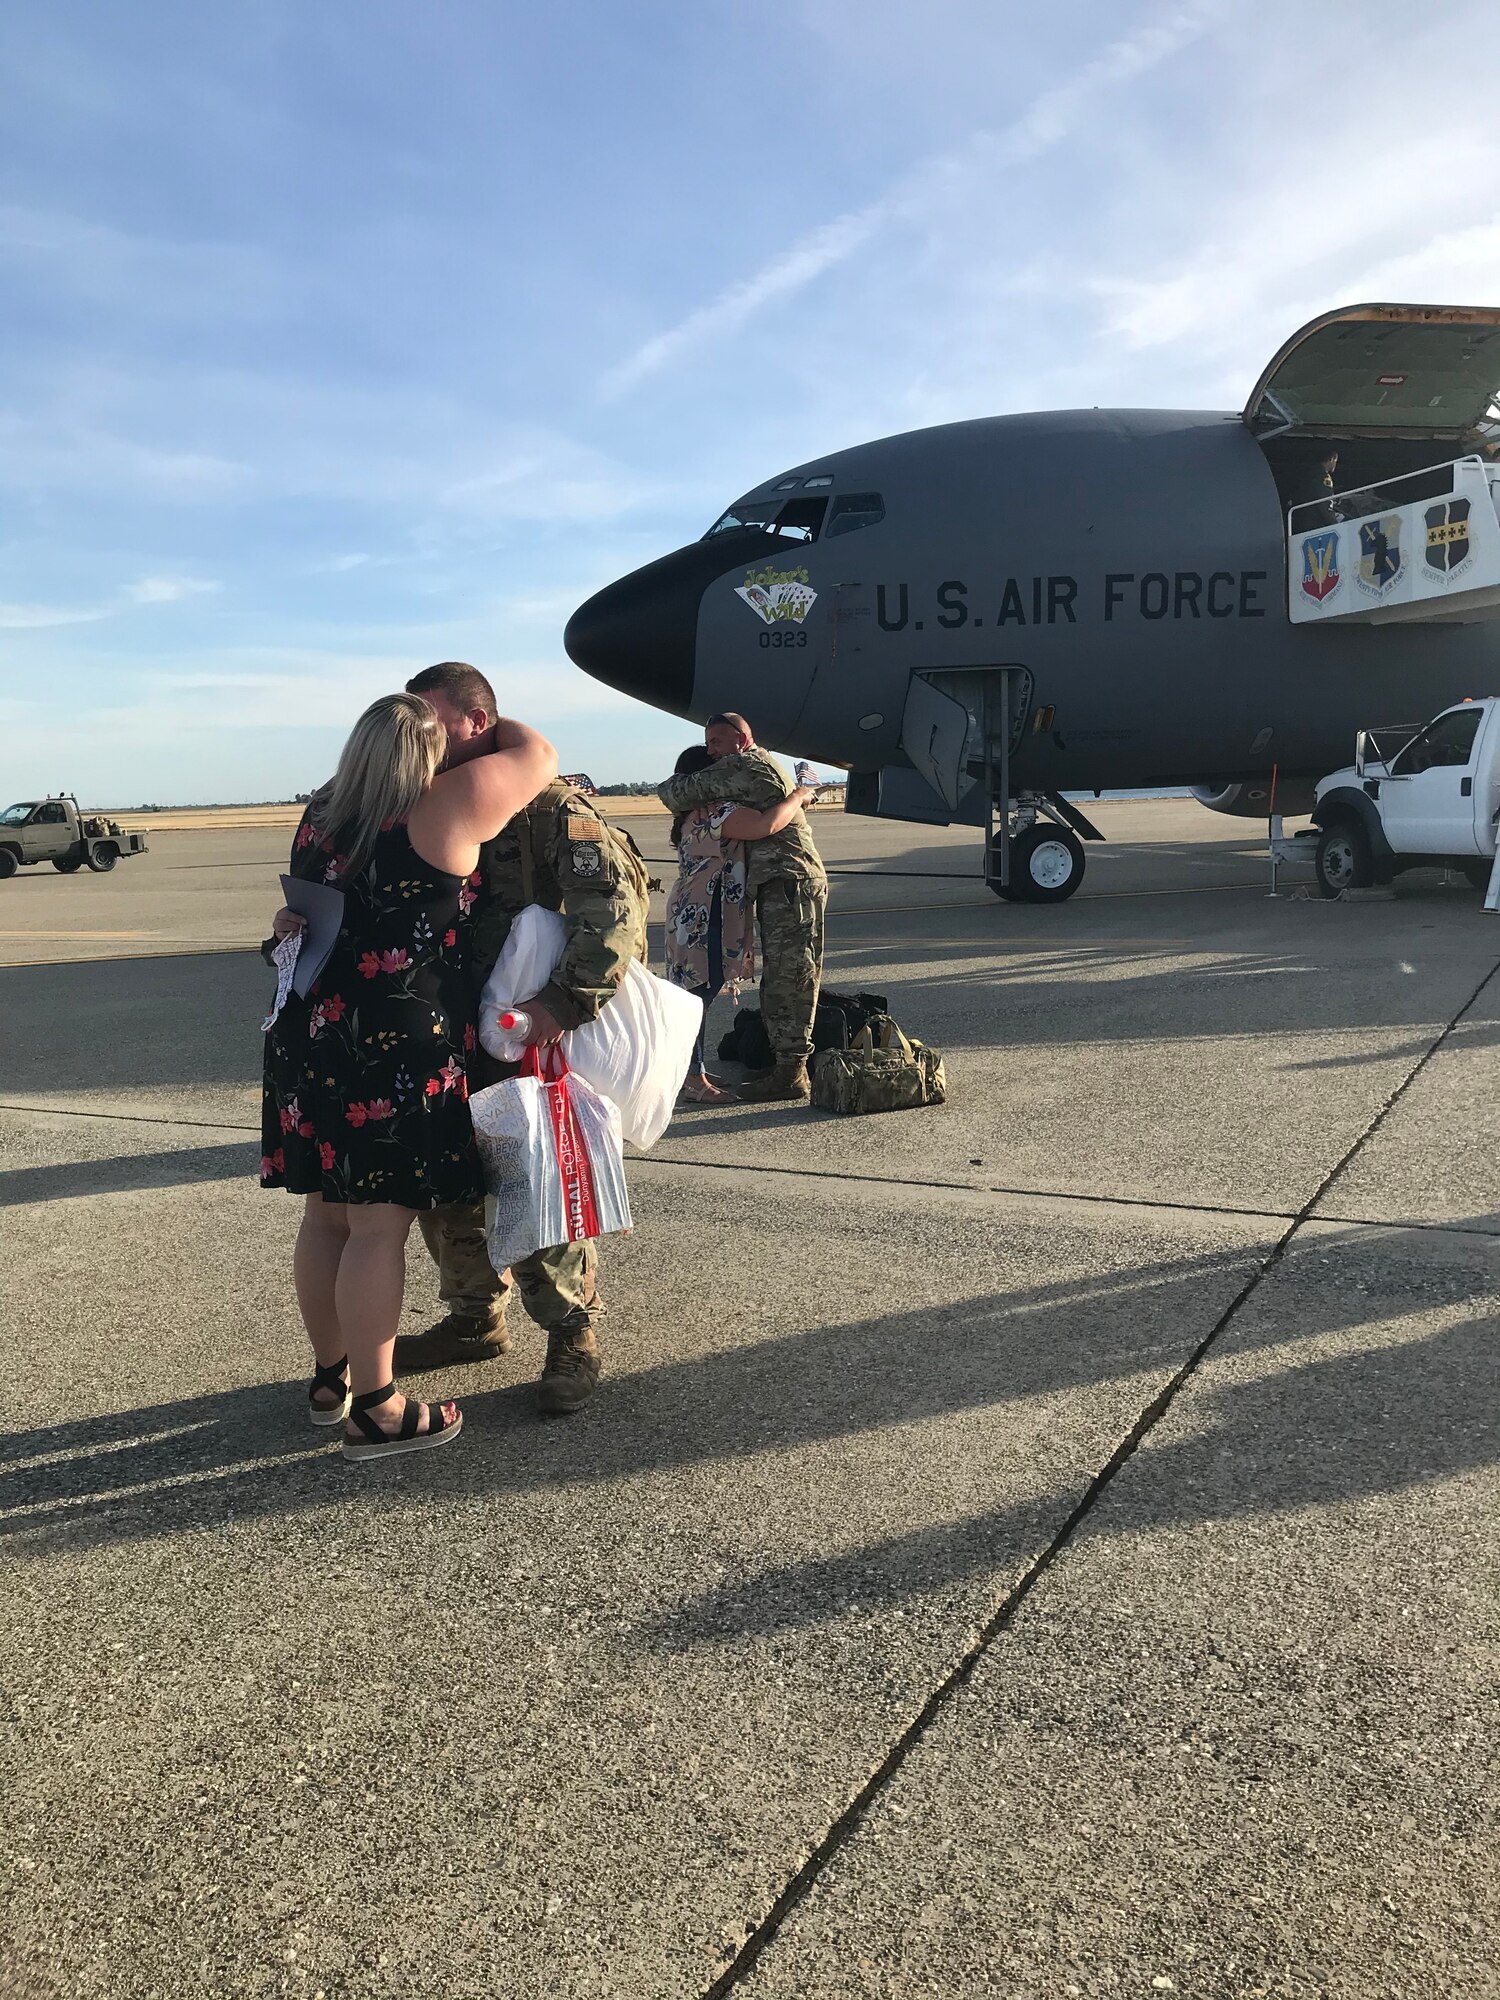 Two couples embrace in hugs June 14, 2020, at Beale Air Force Base, California.